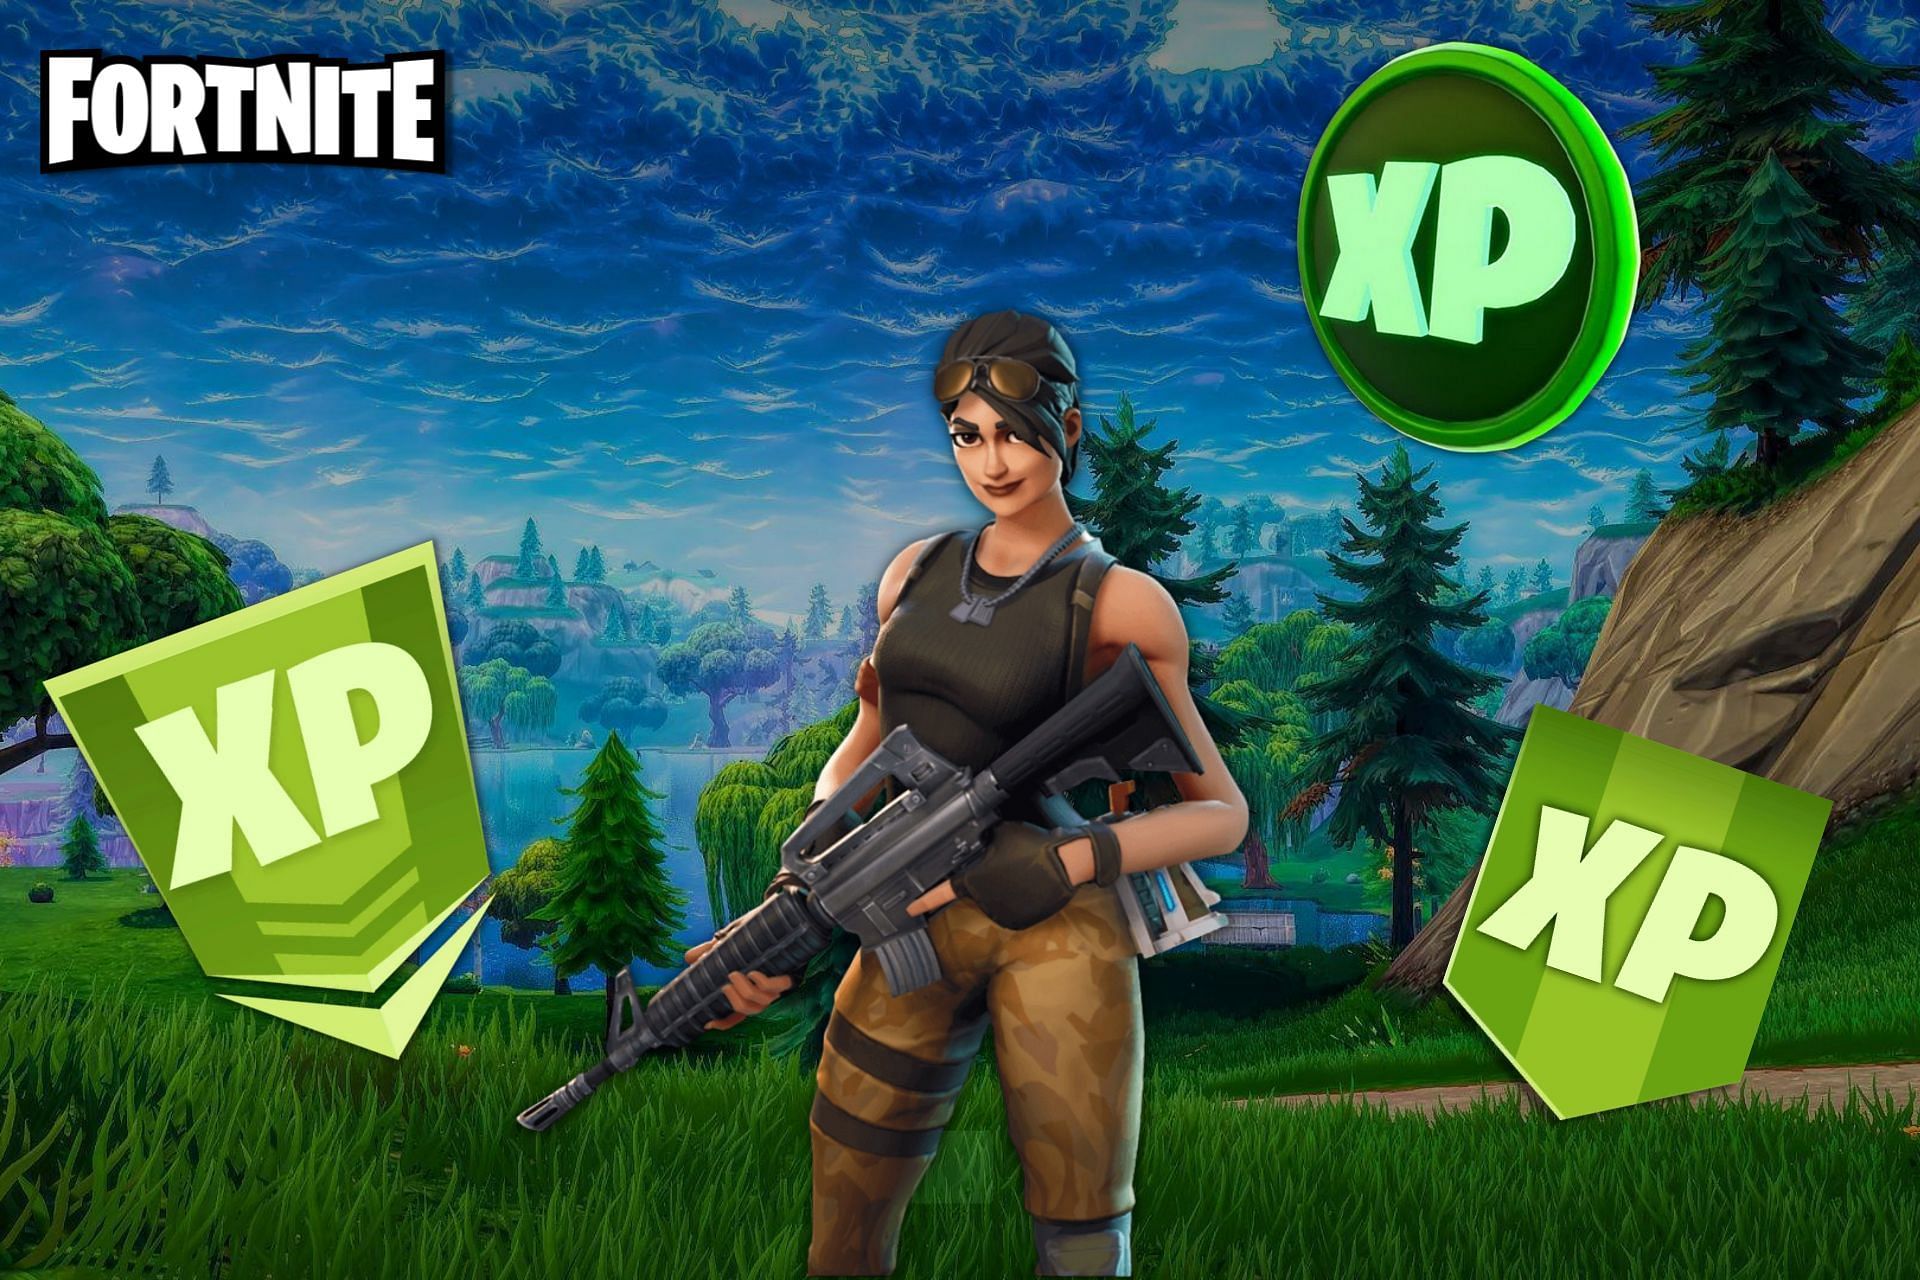 Fortnite XP glitch gives 50,000 XP to players in 5 seconds (Image via Sportskeeda)